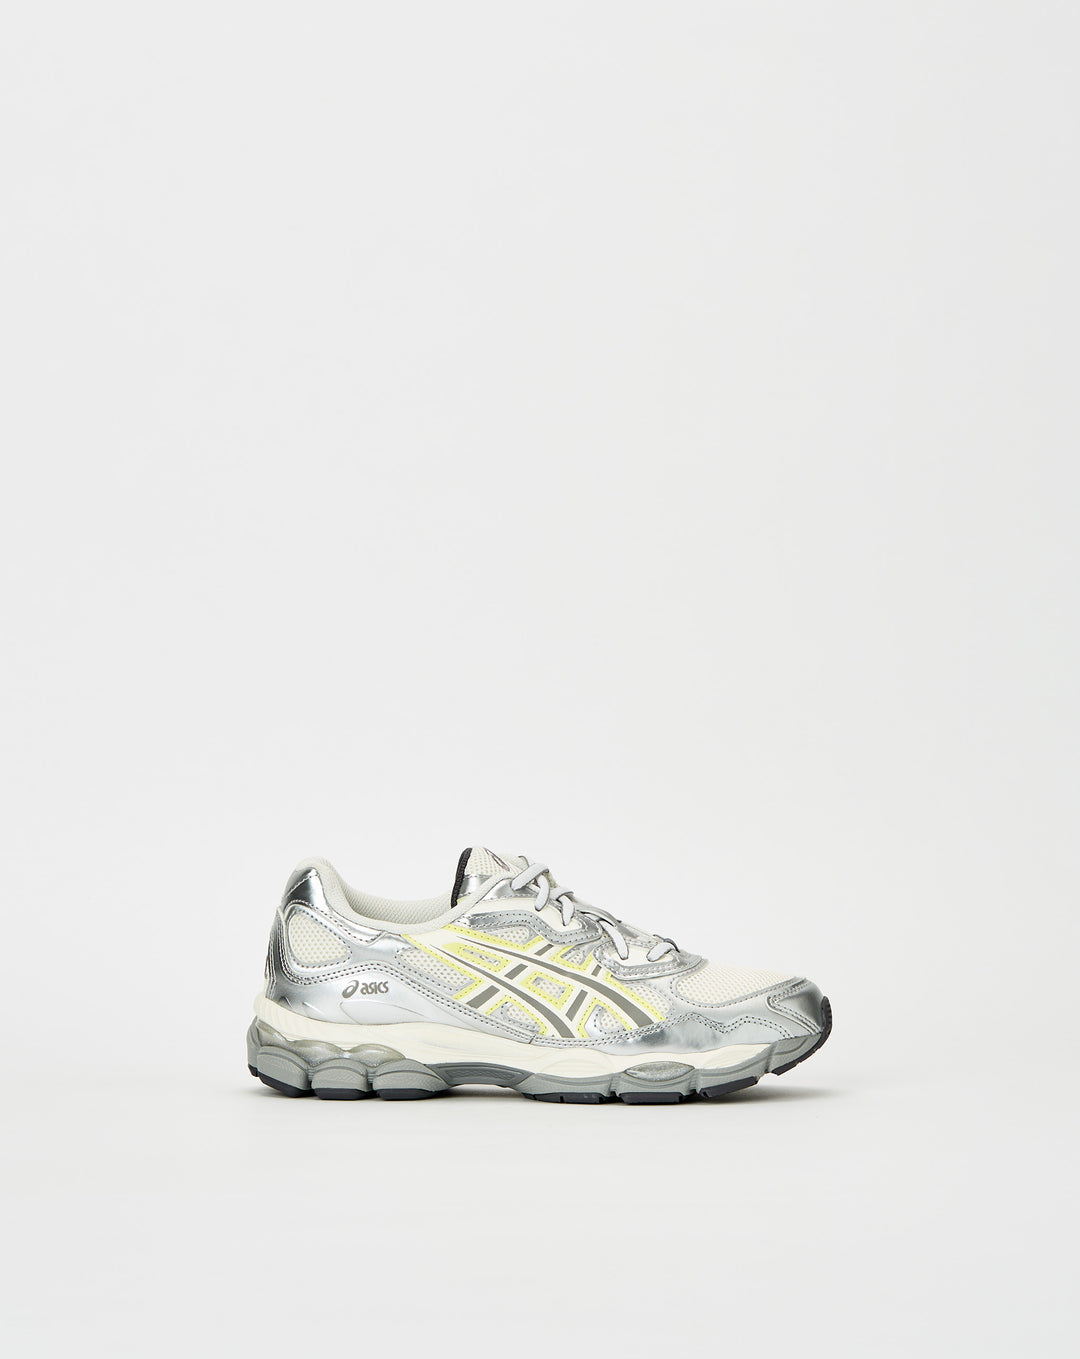 asics All 7 pairs are from Nike and feature a mash-up of some of the most iconic sneakers ever  - Cheap Cerbe Jordan outlet